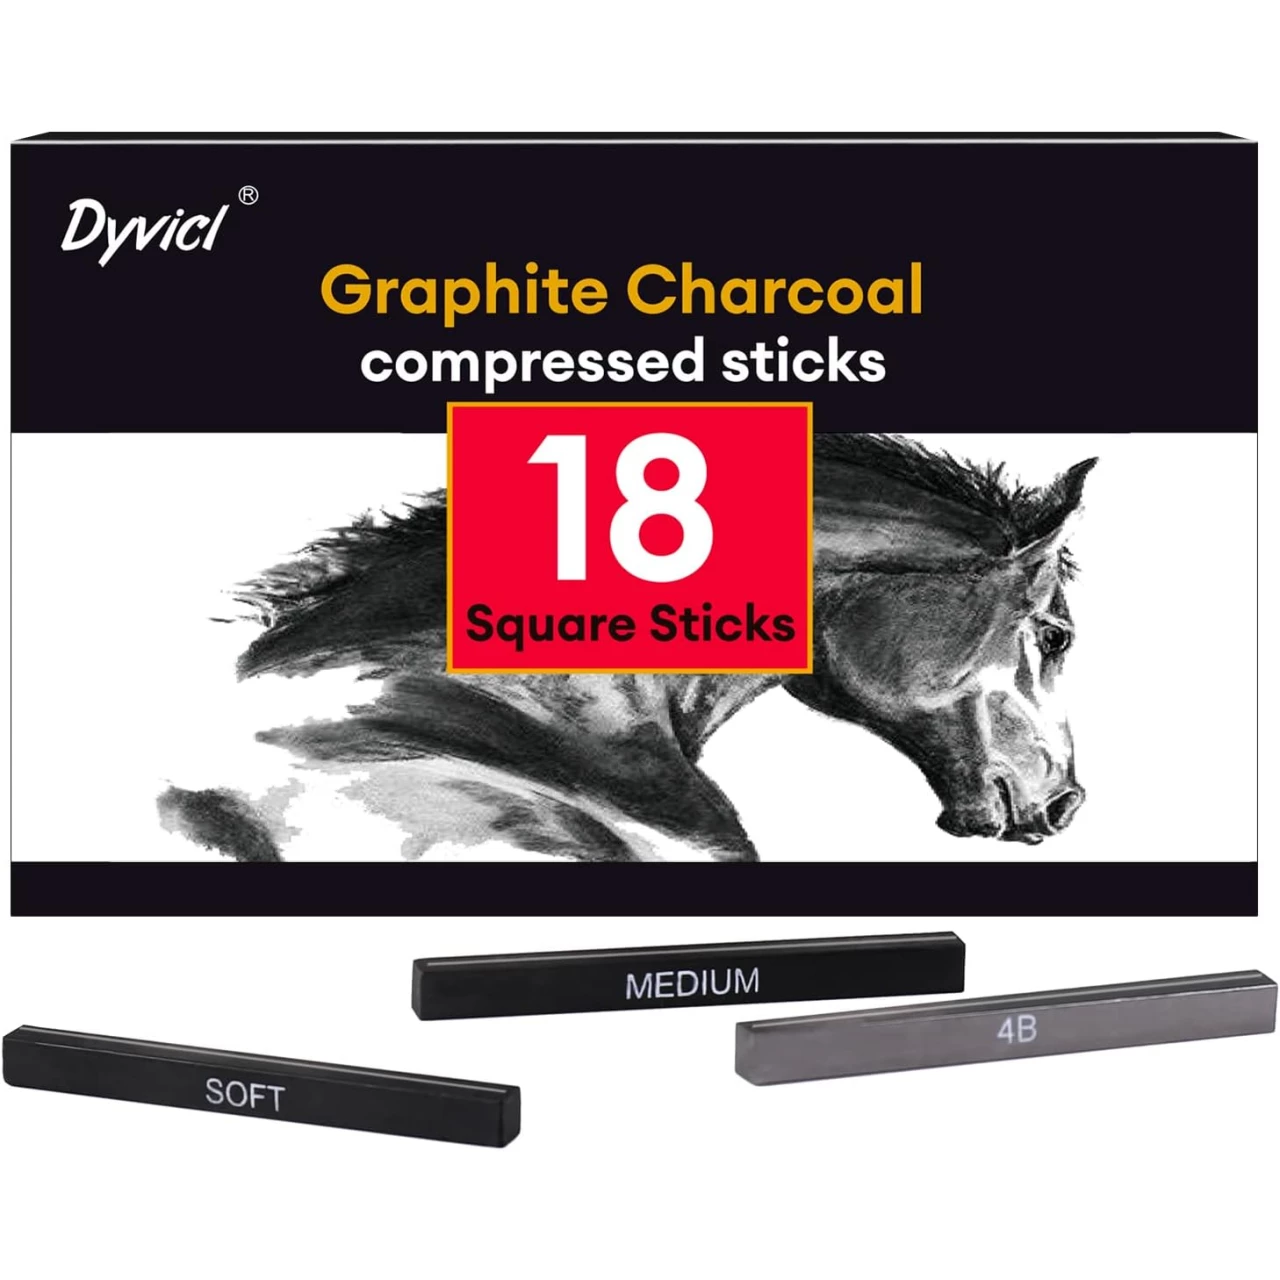 Dyvicl Compressed Graphite Charcoal Sticks, Square Black White Charcoal for Sketching, Drawing, Shading, Blending, Pack of 18